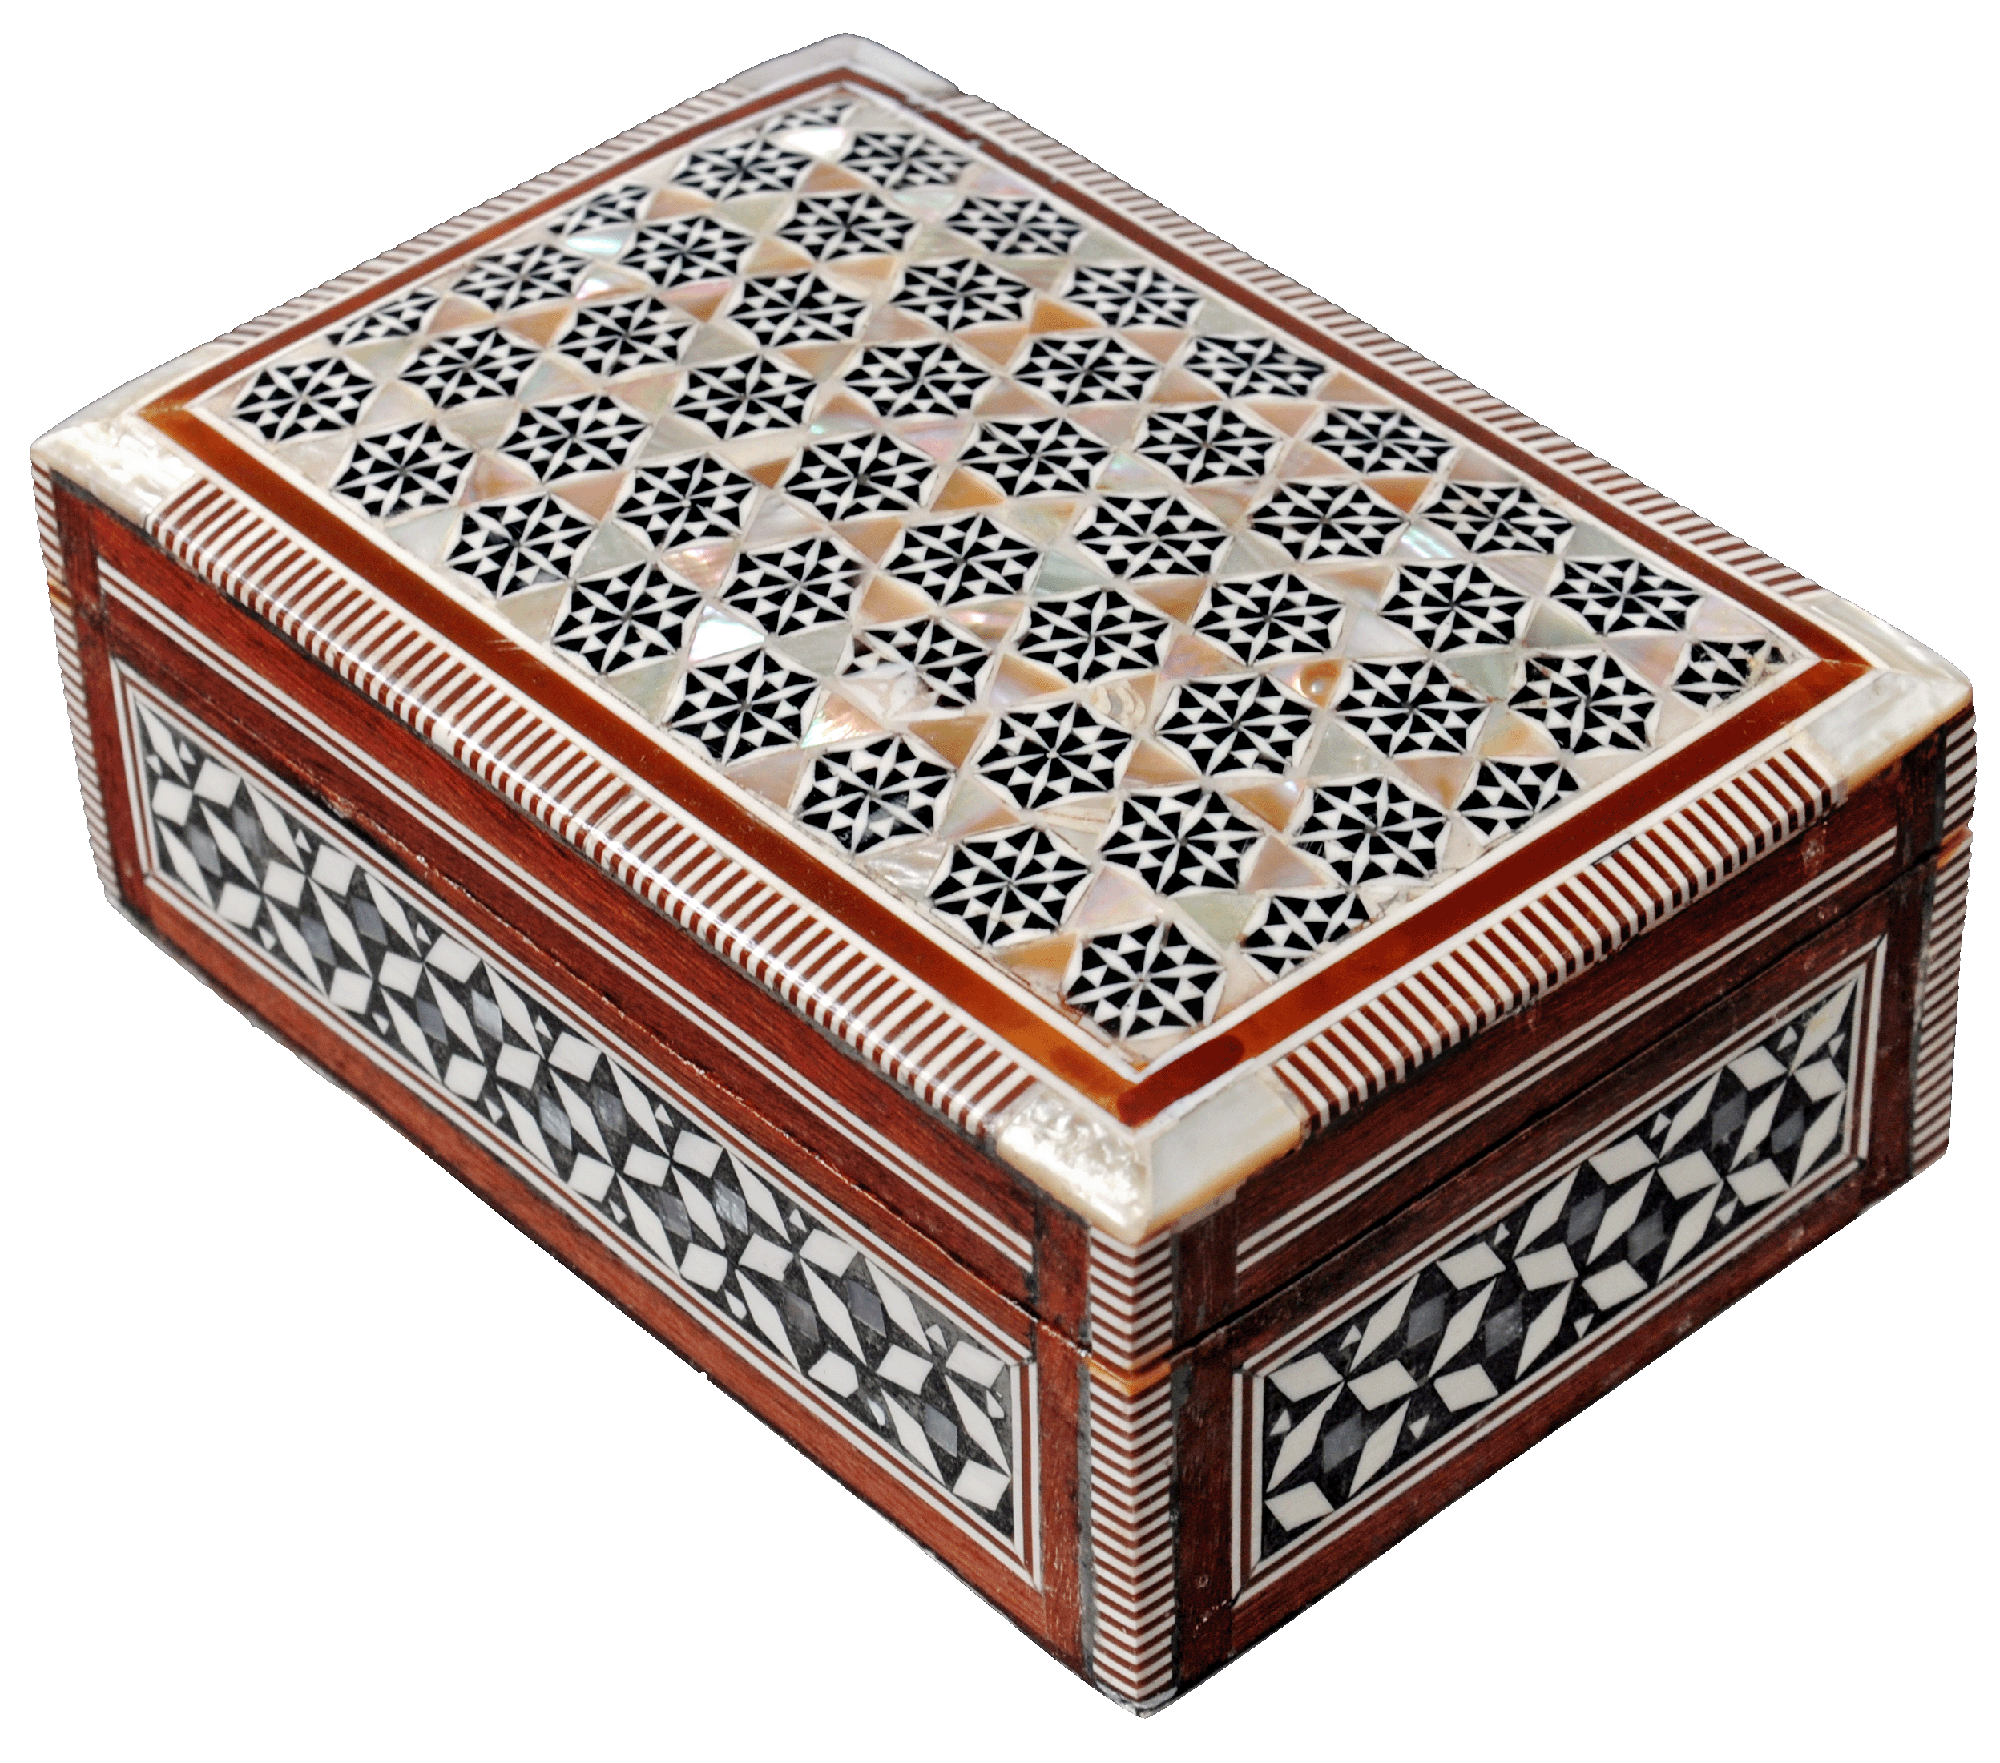 Egyptian Mosaic Jewelry Trinket Box Mother of Pearl BX5